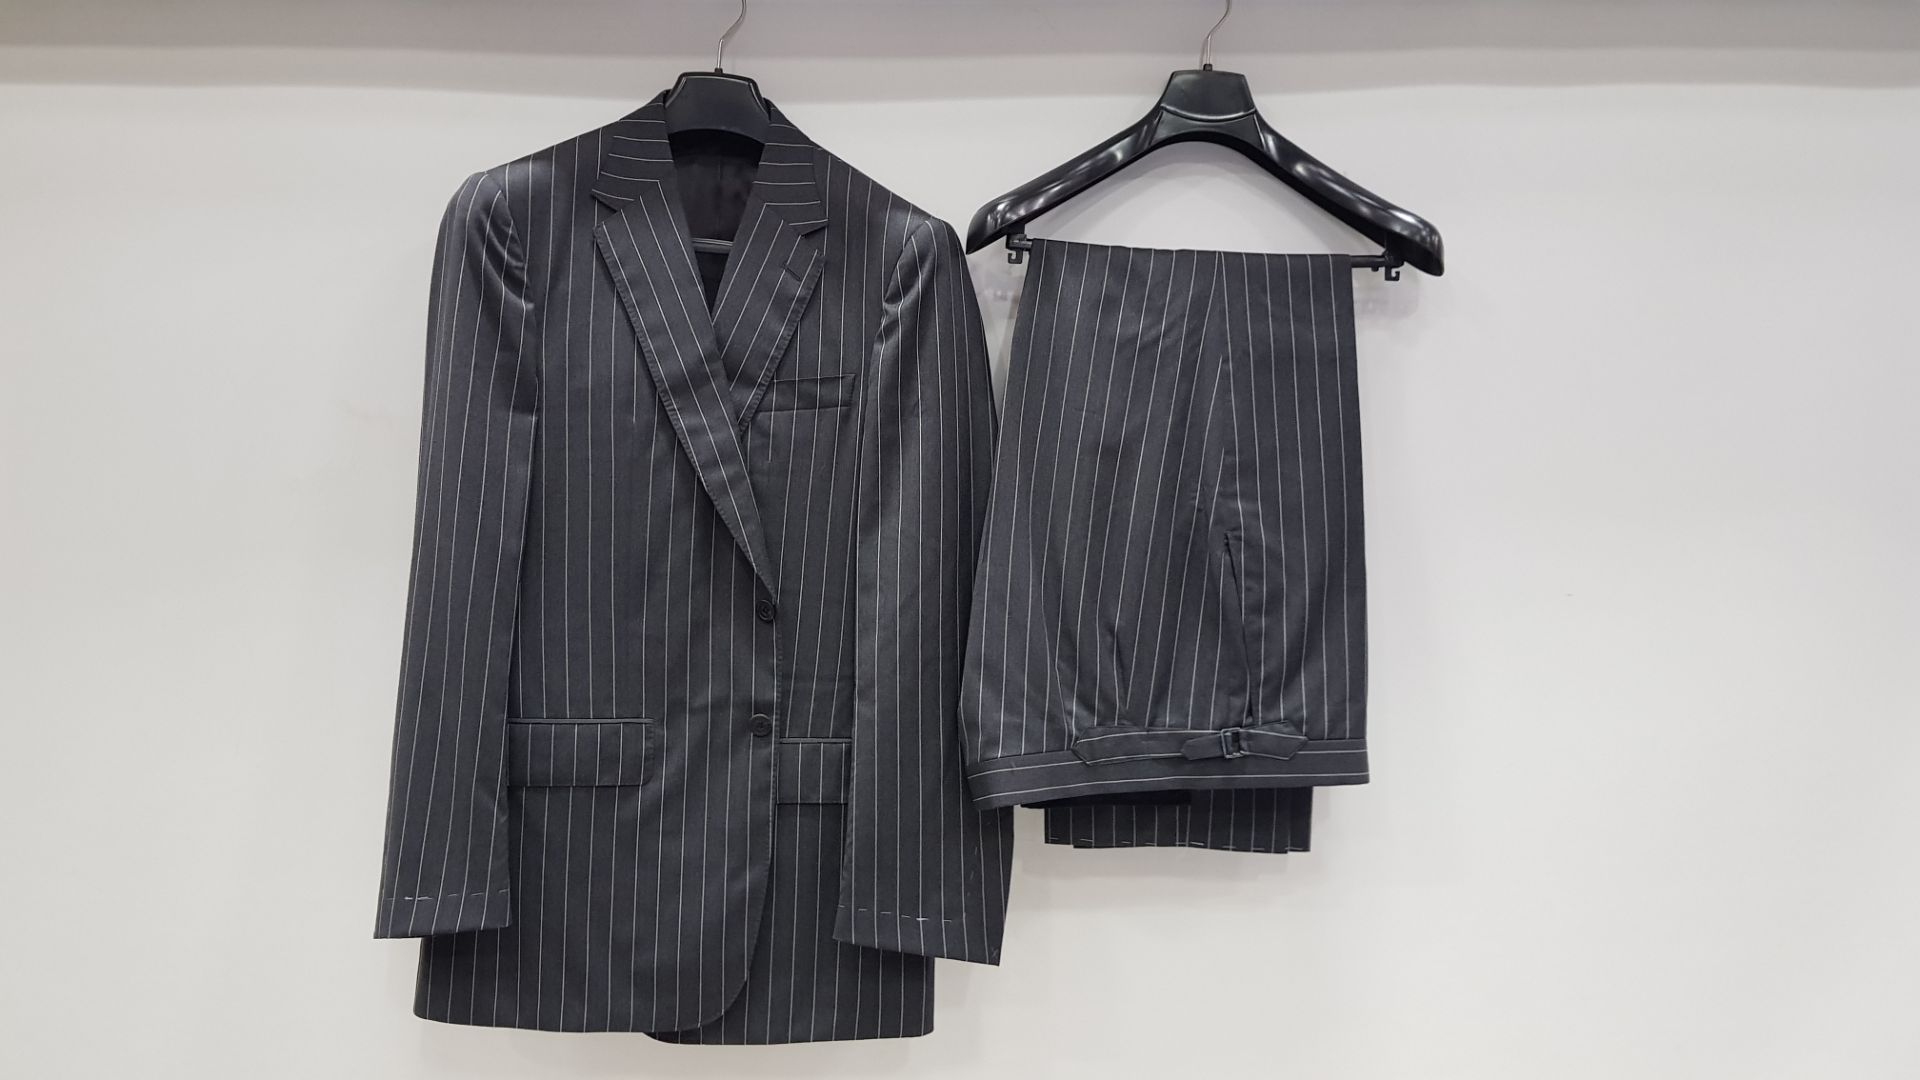 3 X BRAND NEW LUTWYCHE HAND TAILORED GREY PINSTRIPED AND CHARCOAL PINSTRIPRF SUITS SIZE 38R, 46R AND